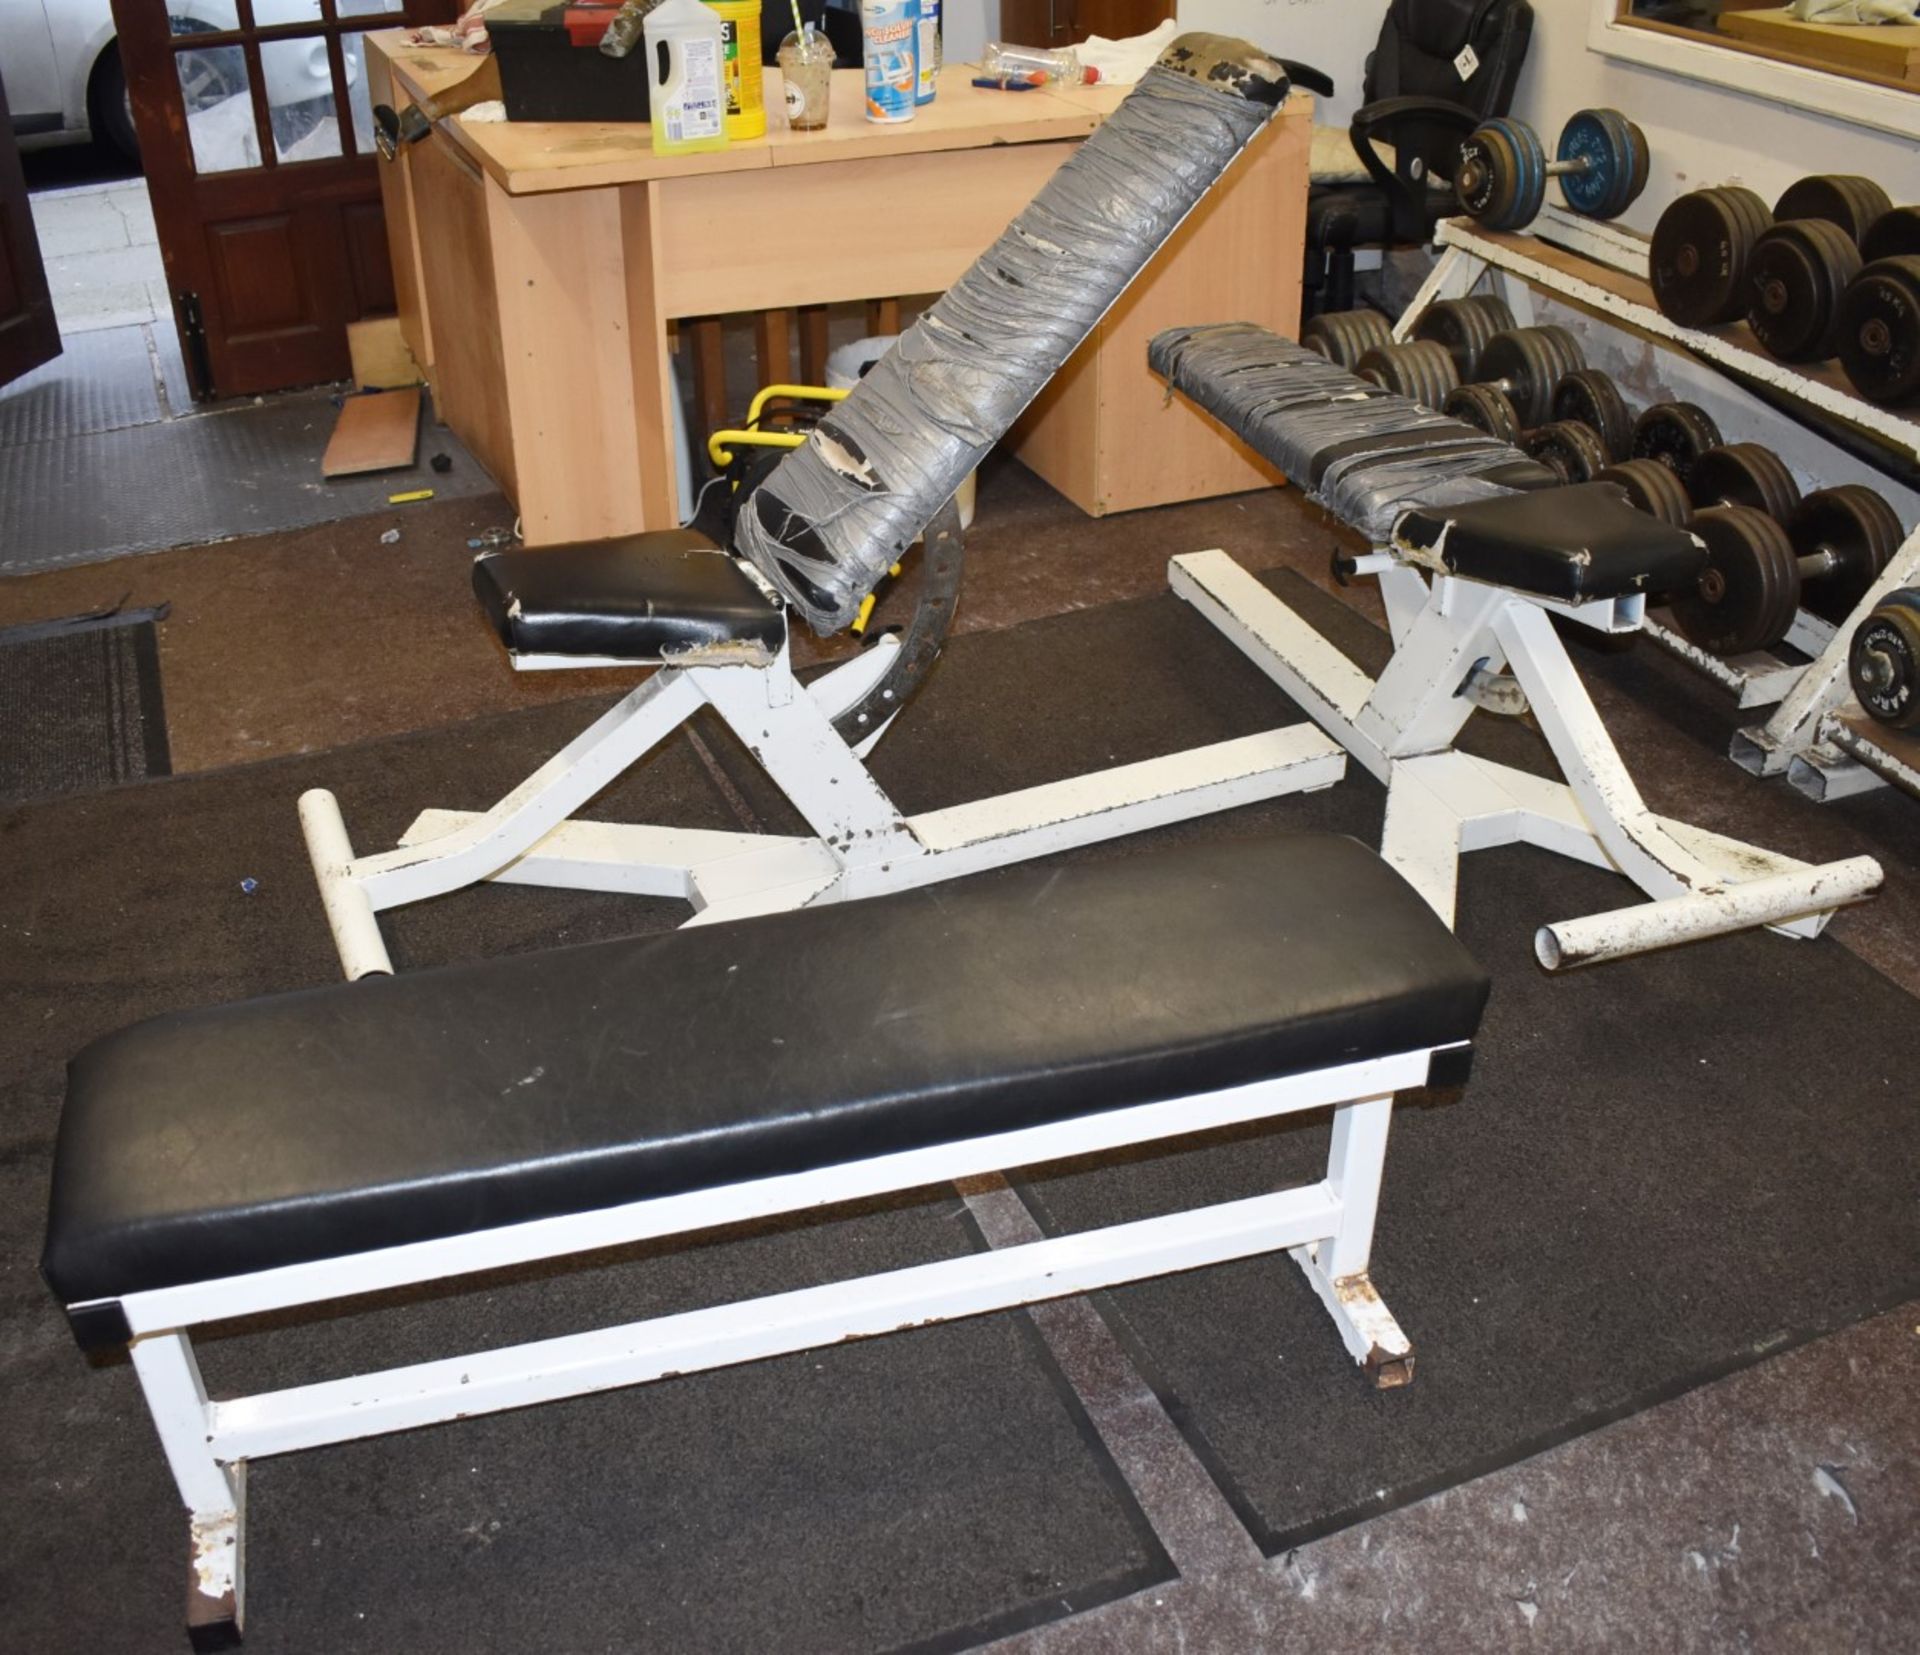 Contents of Bodybuilding and Strongman Gym - Includes Approx 30 Pieces of Gym Equipment, Floor Mats, - Image 29 of 95